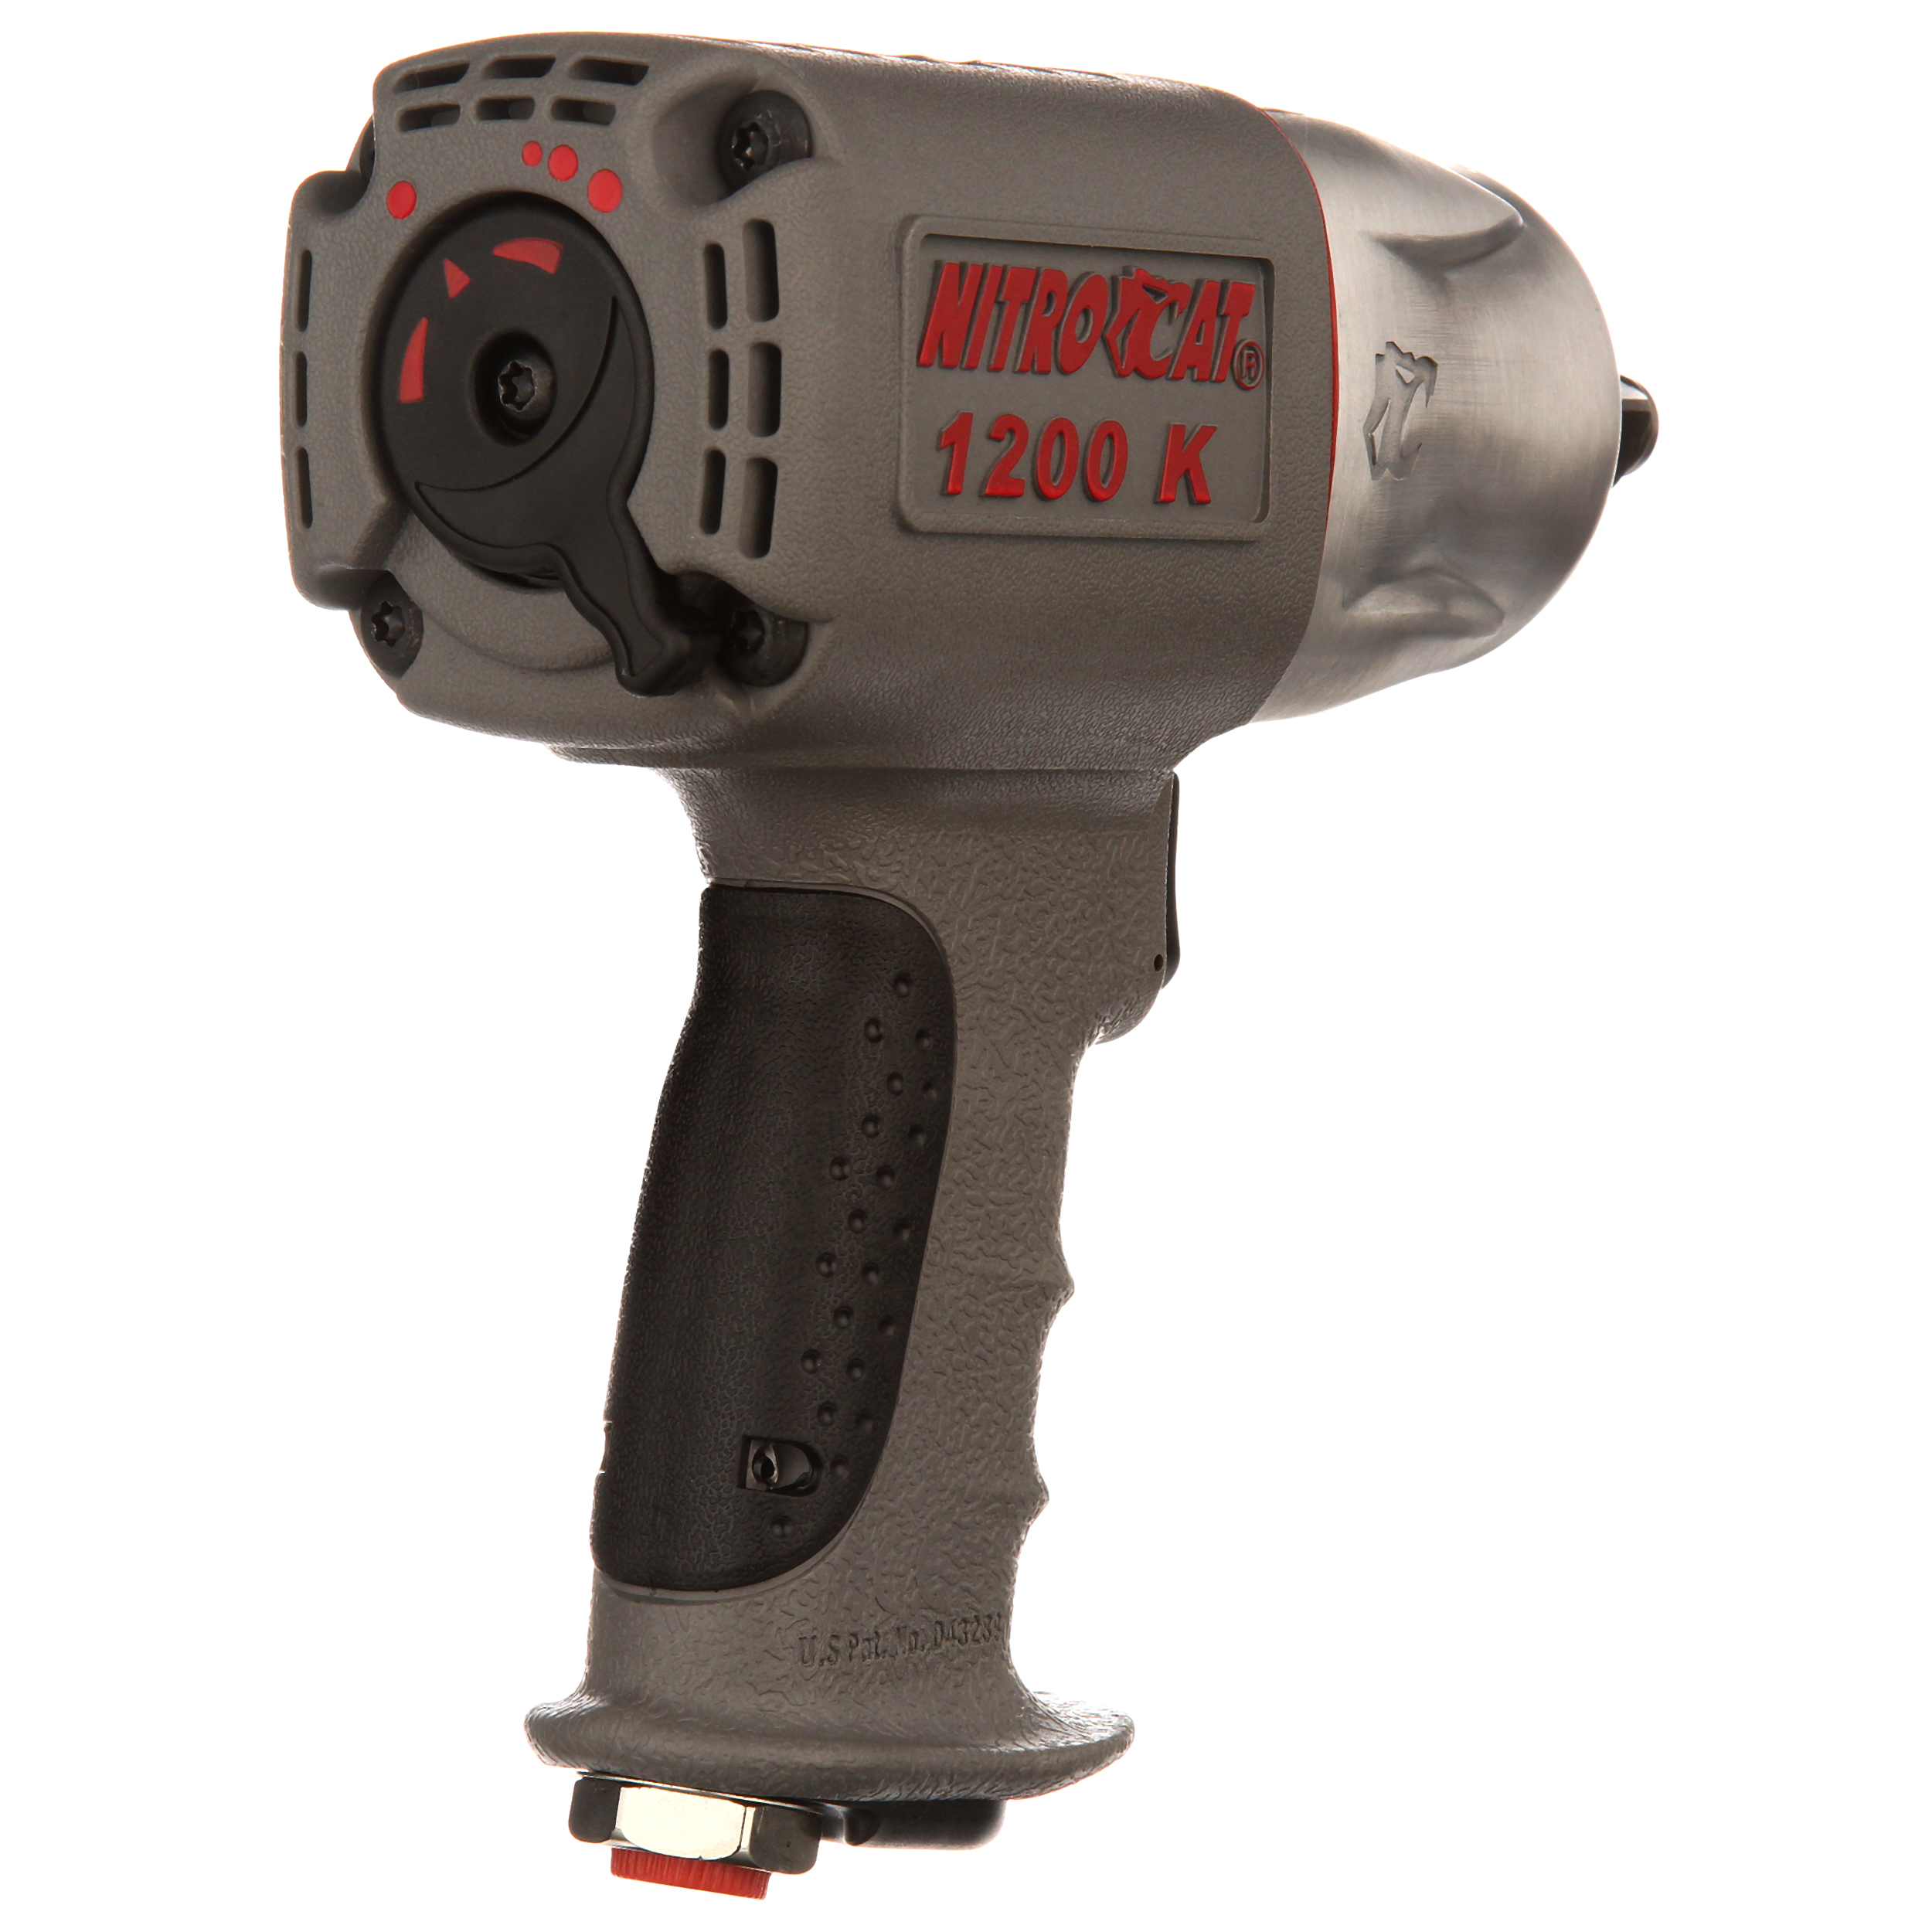 AIRCAT Pneumatic Tools 1200-K 1/2-Inch Nitrocat Composite Twin Clutch Impact Wrench 1295 ft-lbs - image 4 of 6